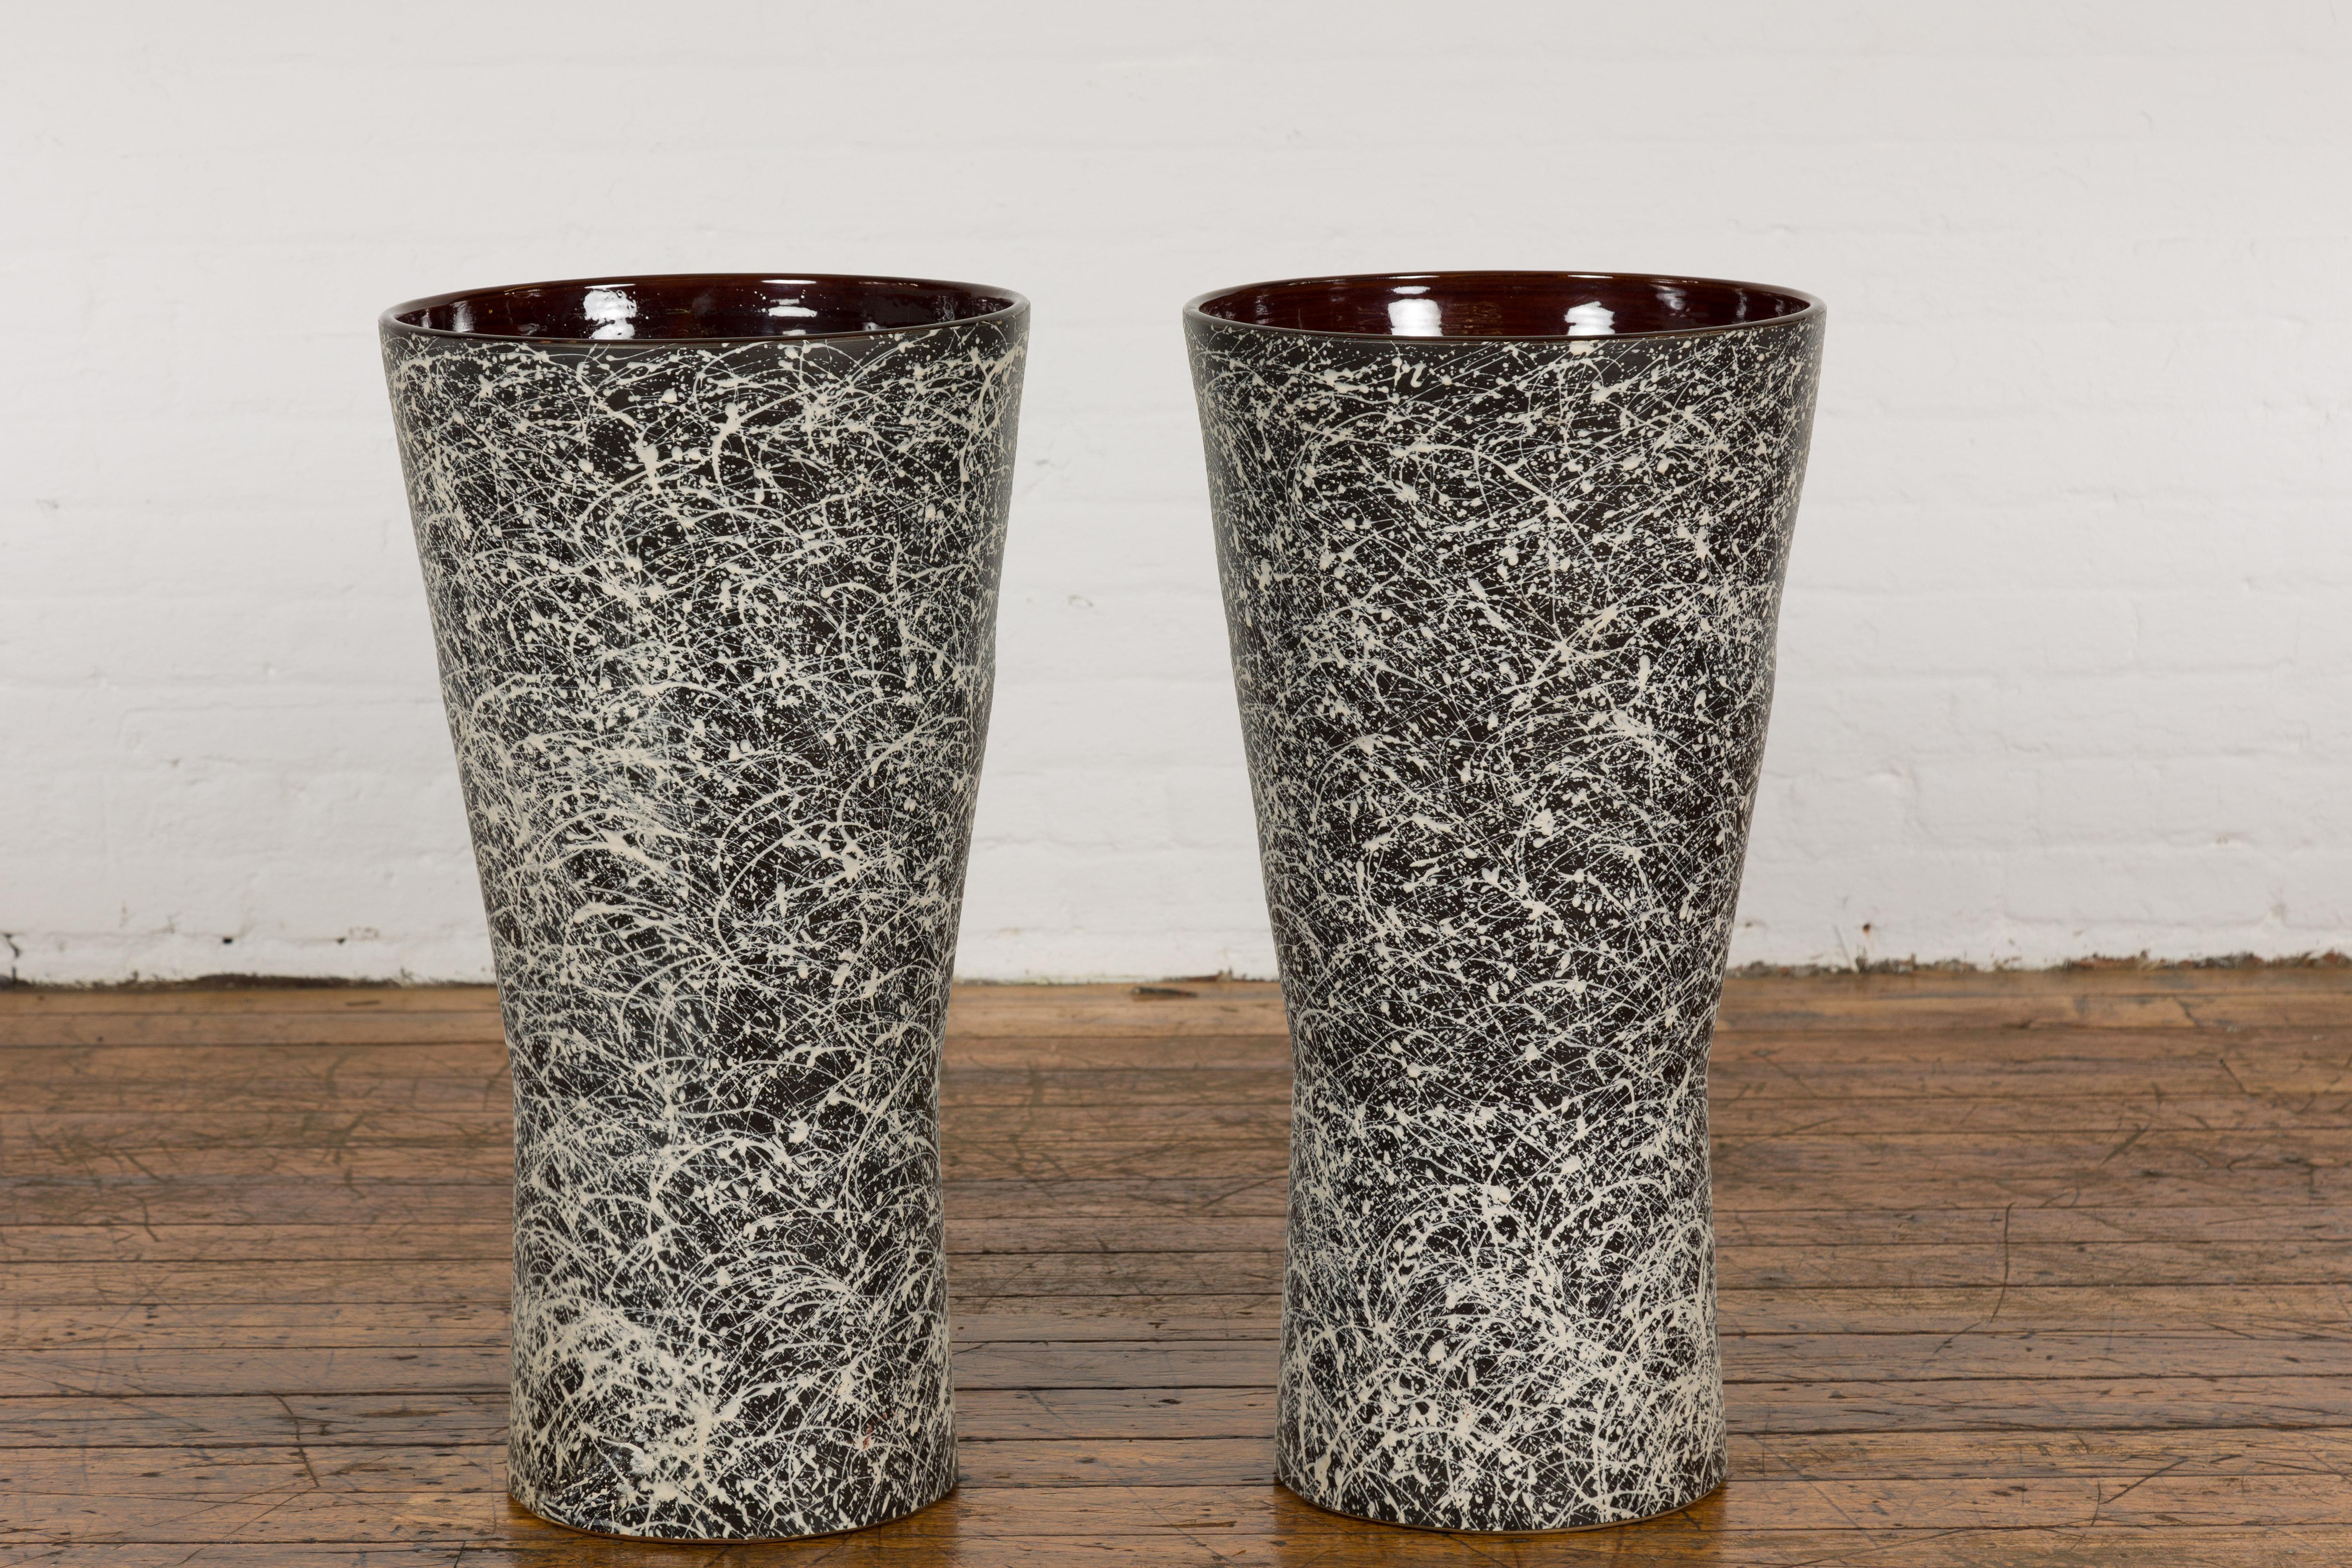 A pair of large artisan handcrafted Prem Collection vases with dark ground, energetic hand-painted white dripping décor, burgundy glazed interior and tapering lines. Experience the raw appeal of this striking pair of large artisan vases from the